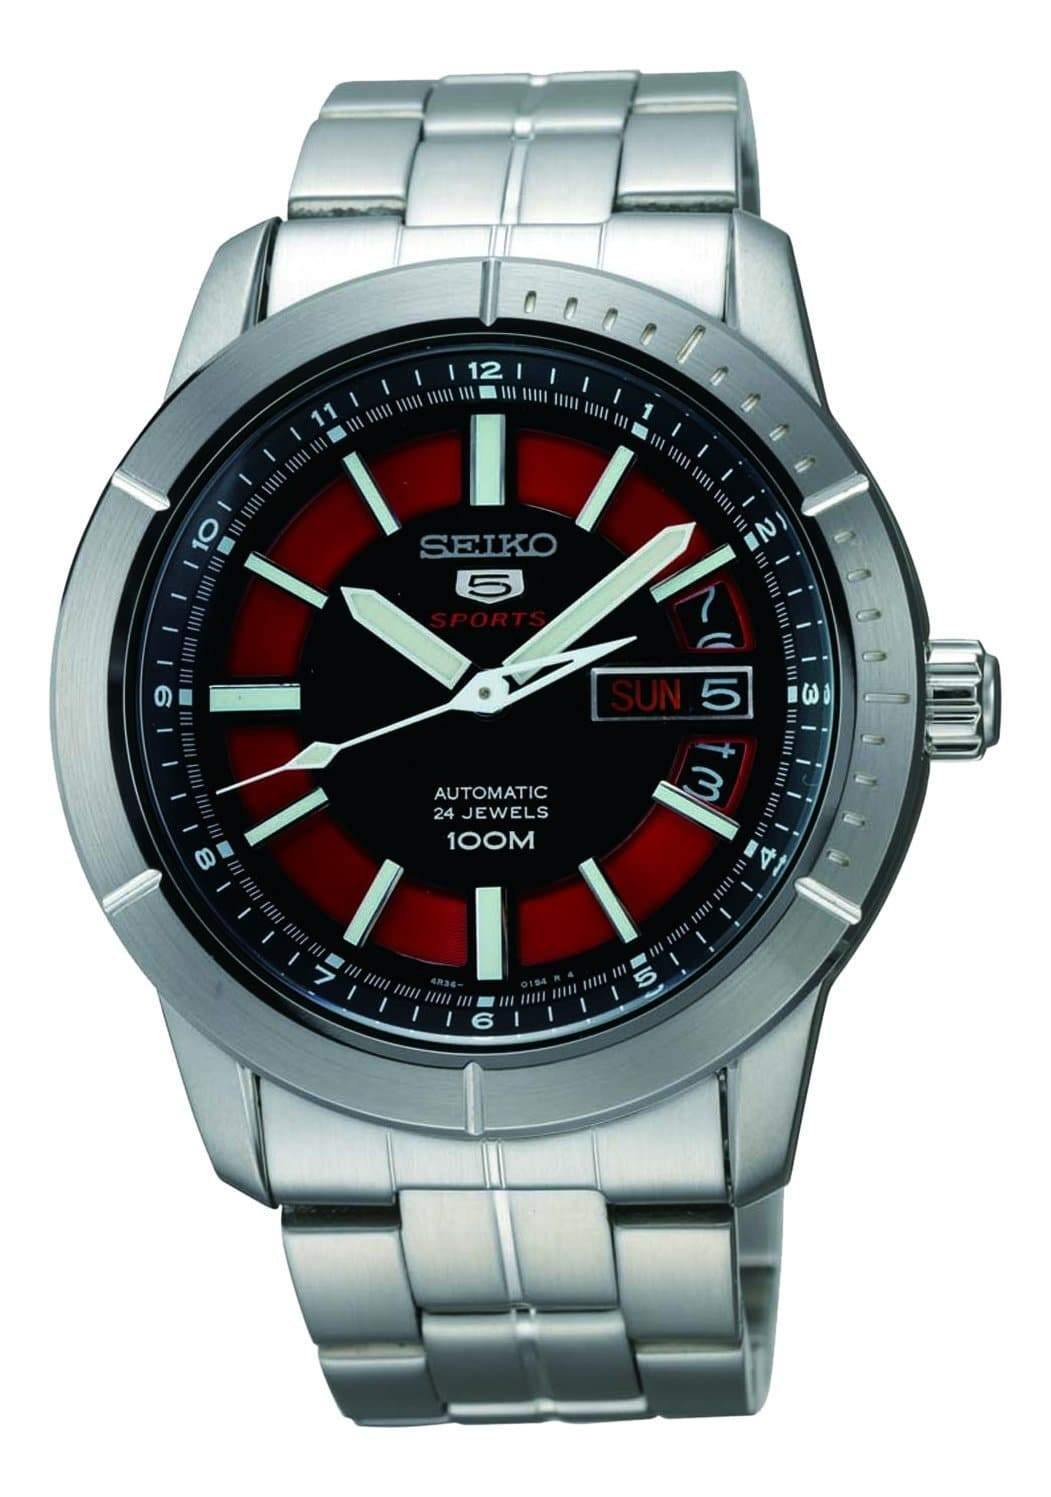 Seiko 5 Sports 100M Automatic Men's Watch Black with Red Dial SRP339K1 - Prestige